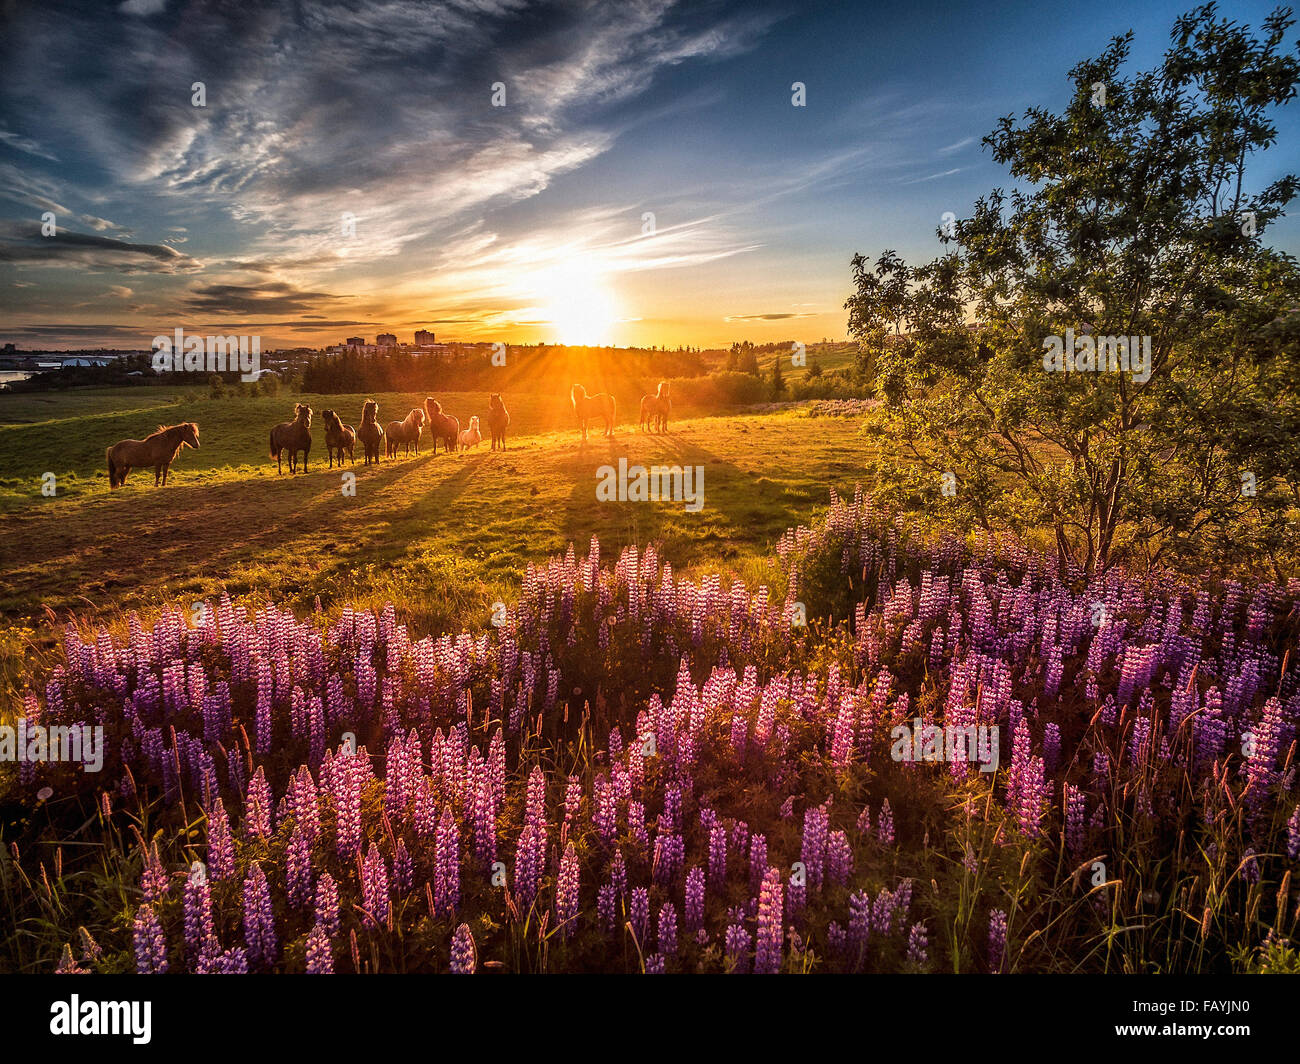 Midnight sun, lupines wildflowers and horses, Reykjavik, Iceland. Image shot with a drone. Stock Photo